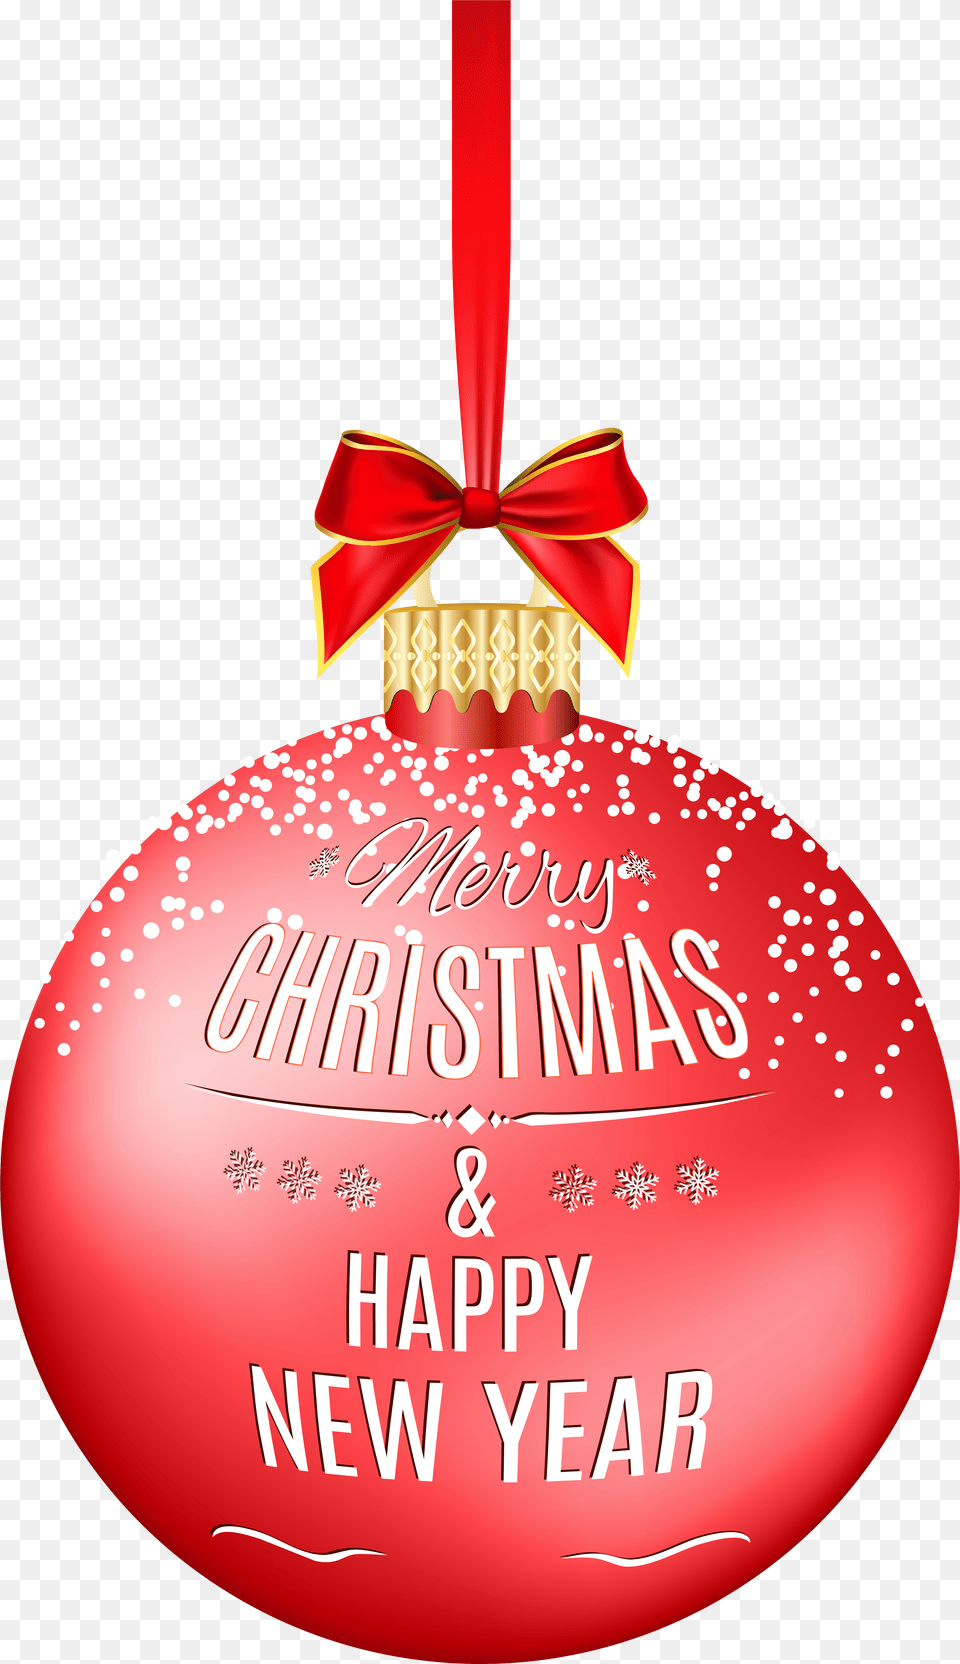 Merry Christmas Art Clip Free Download Clip Art Merry Christmas And Happy New Year, Accessories, Ornament, Food, Ketchup Png